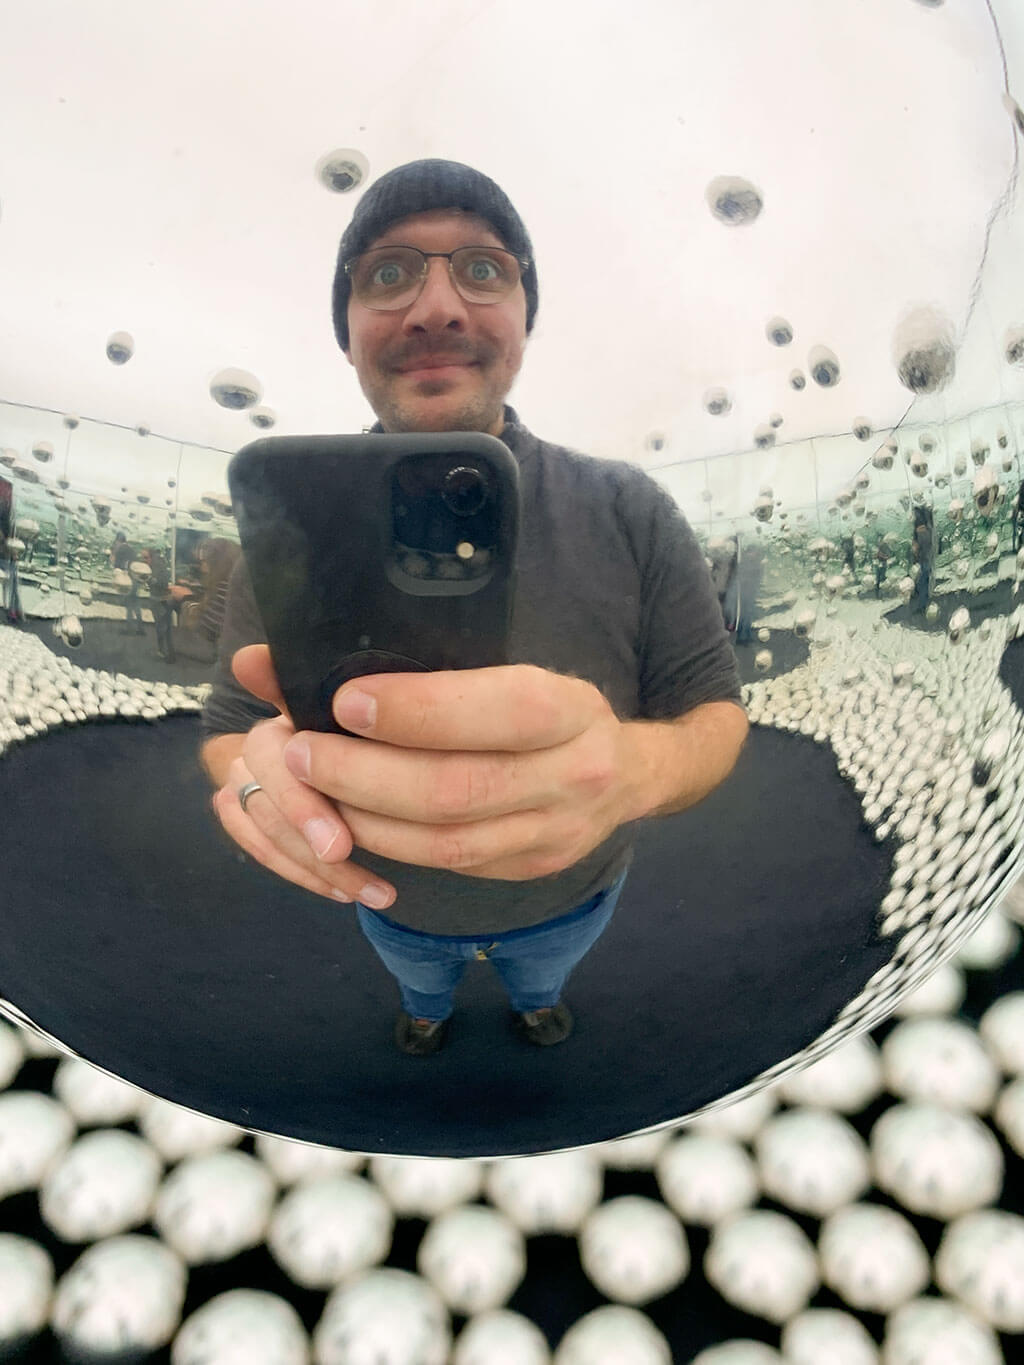 drive-swim-fly-chicago-illinois-wndr-museum-selfie-experience-family-fun-yayoi-kusama-lets-survive-forever-mirror-room-balls-spheres-brandon